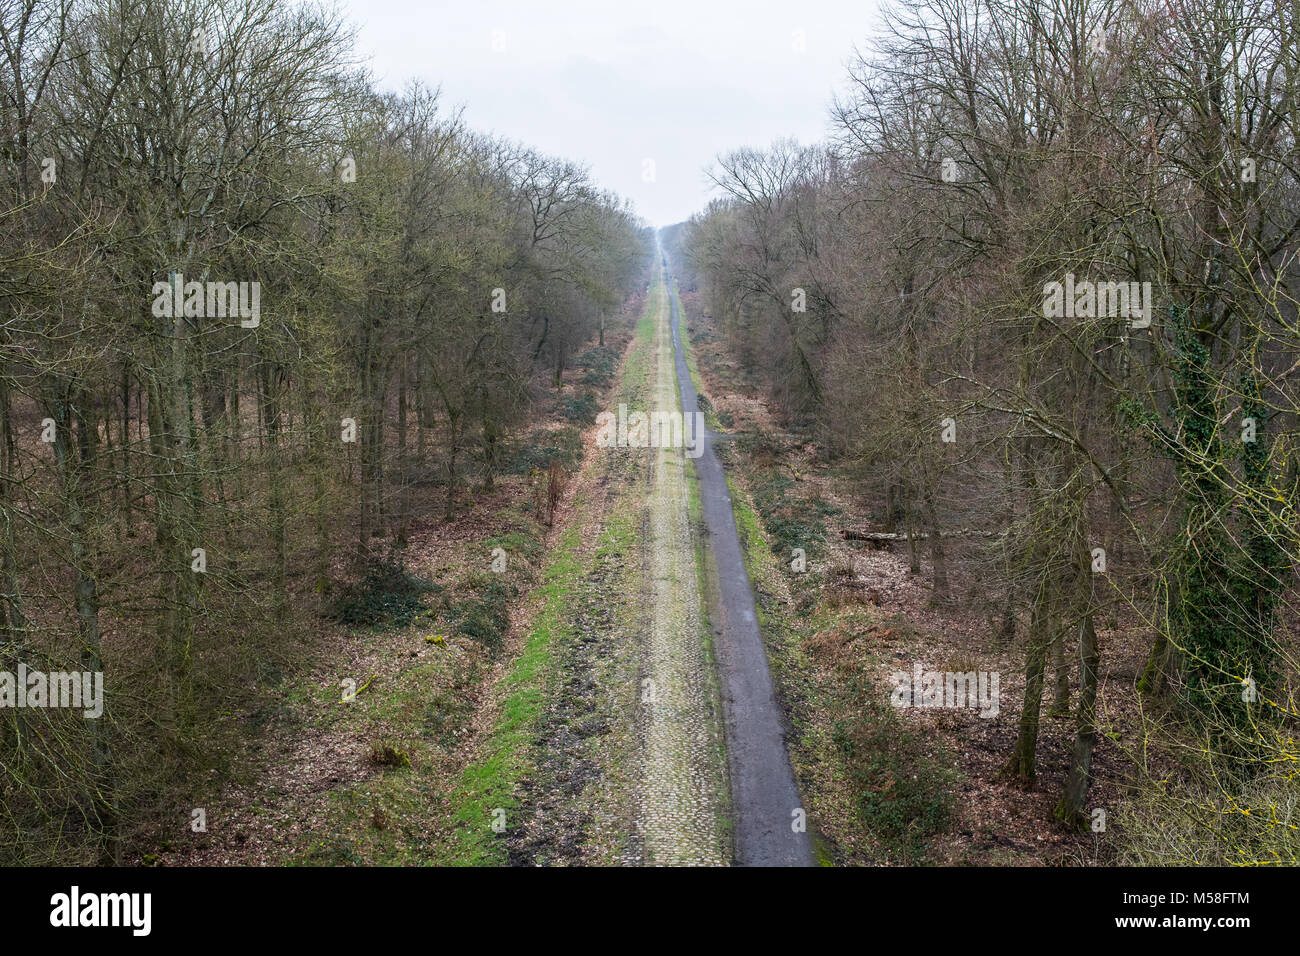 The forest of Arenberg with cobble stones Stock Photo